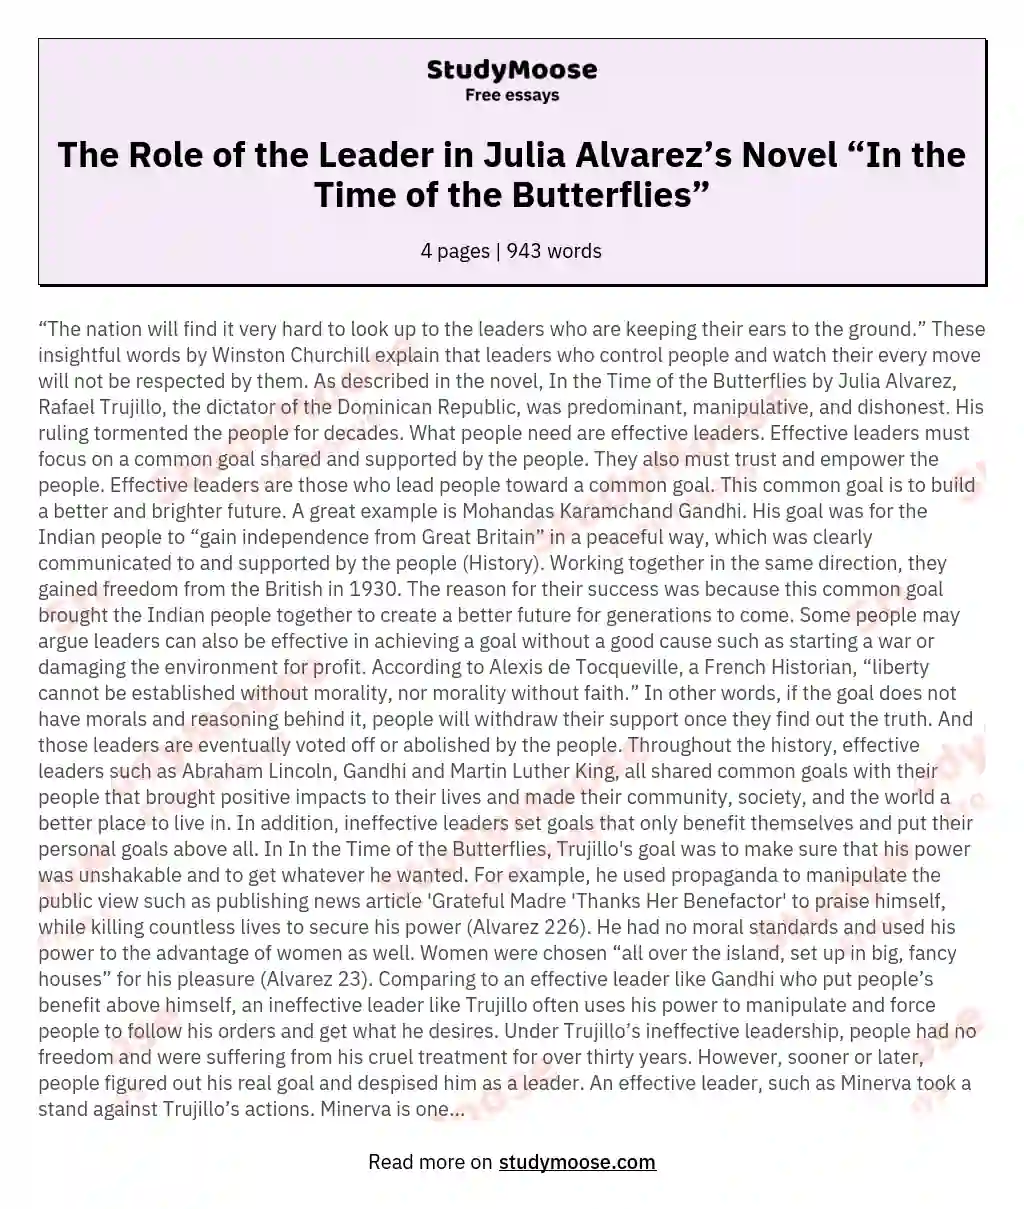 The Role of the Leader in Julia Alvarez’s Novel “In the Time of the Butterflies” essay